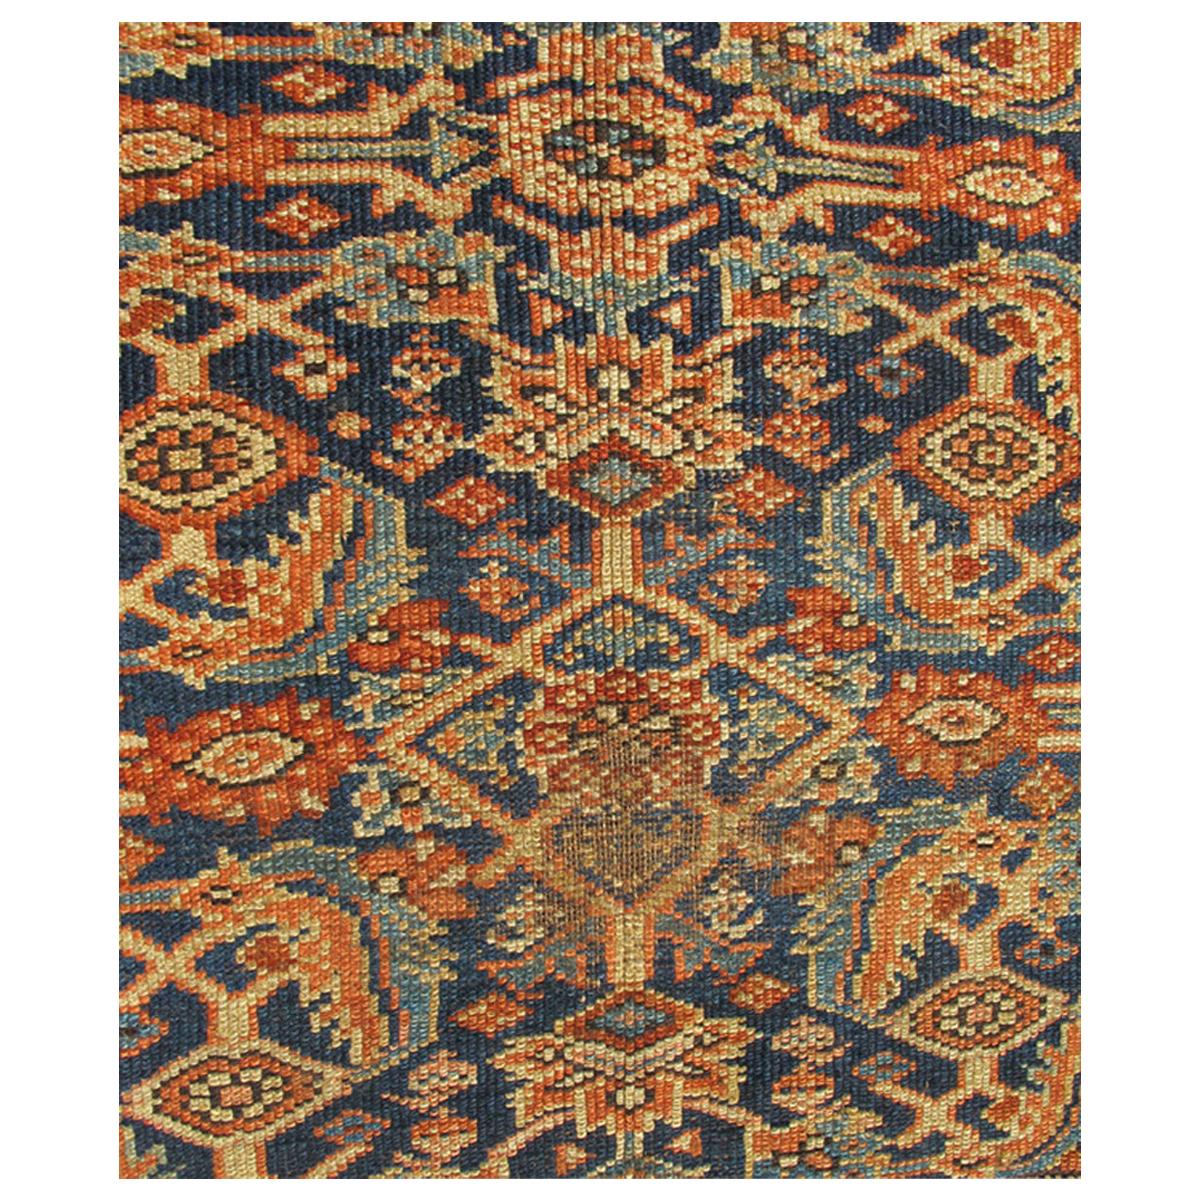 Antique Persian Sultanabad/Mahal Fragment Rug in Blue Background in Multi-Colors For Sale